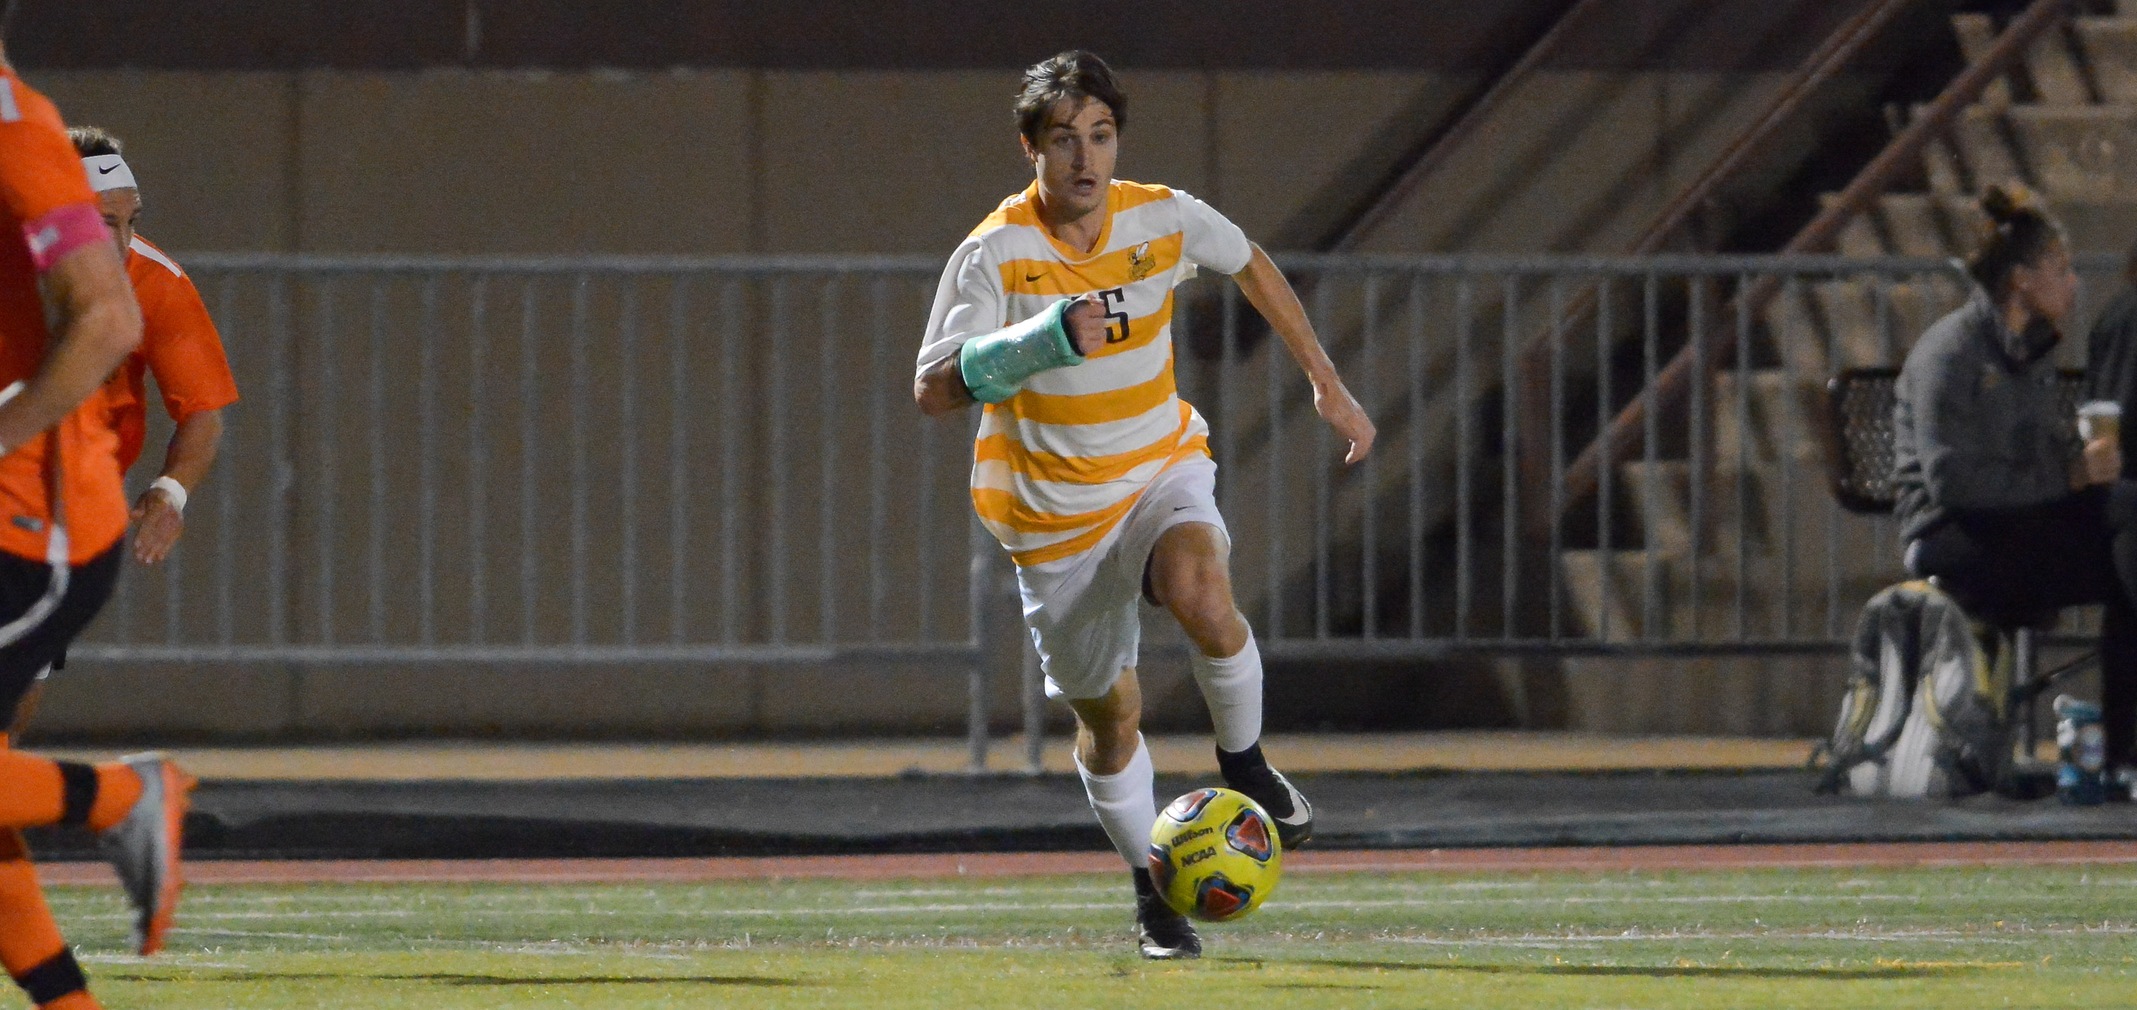 Sophomore two-time All-OAC forward Danny Ruple (Photo by Caitlin Shoemaker)